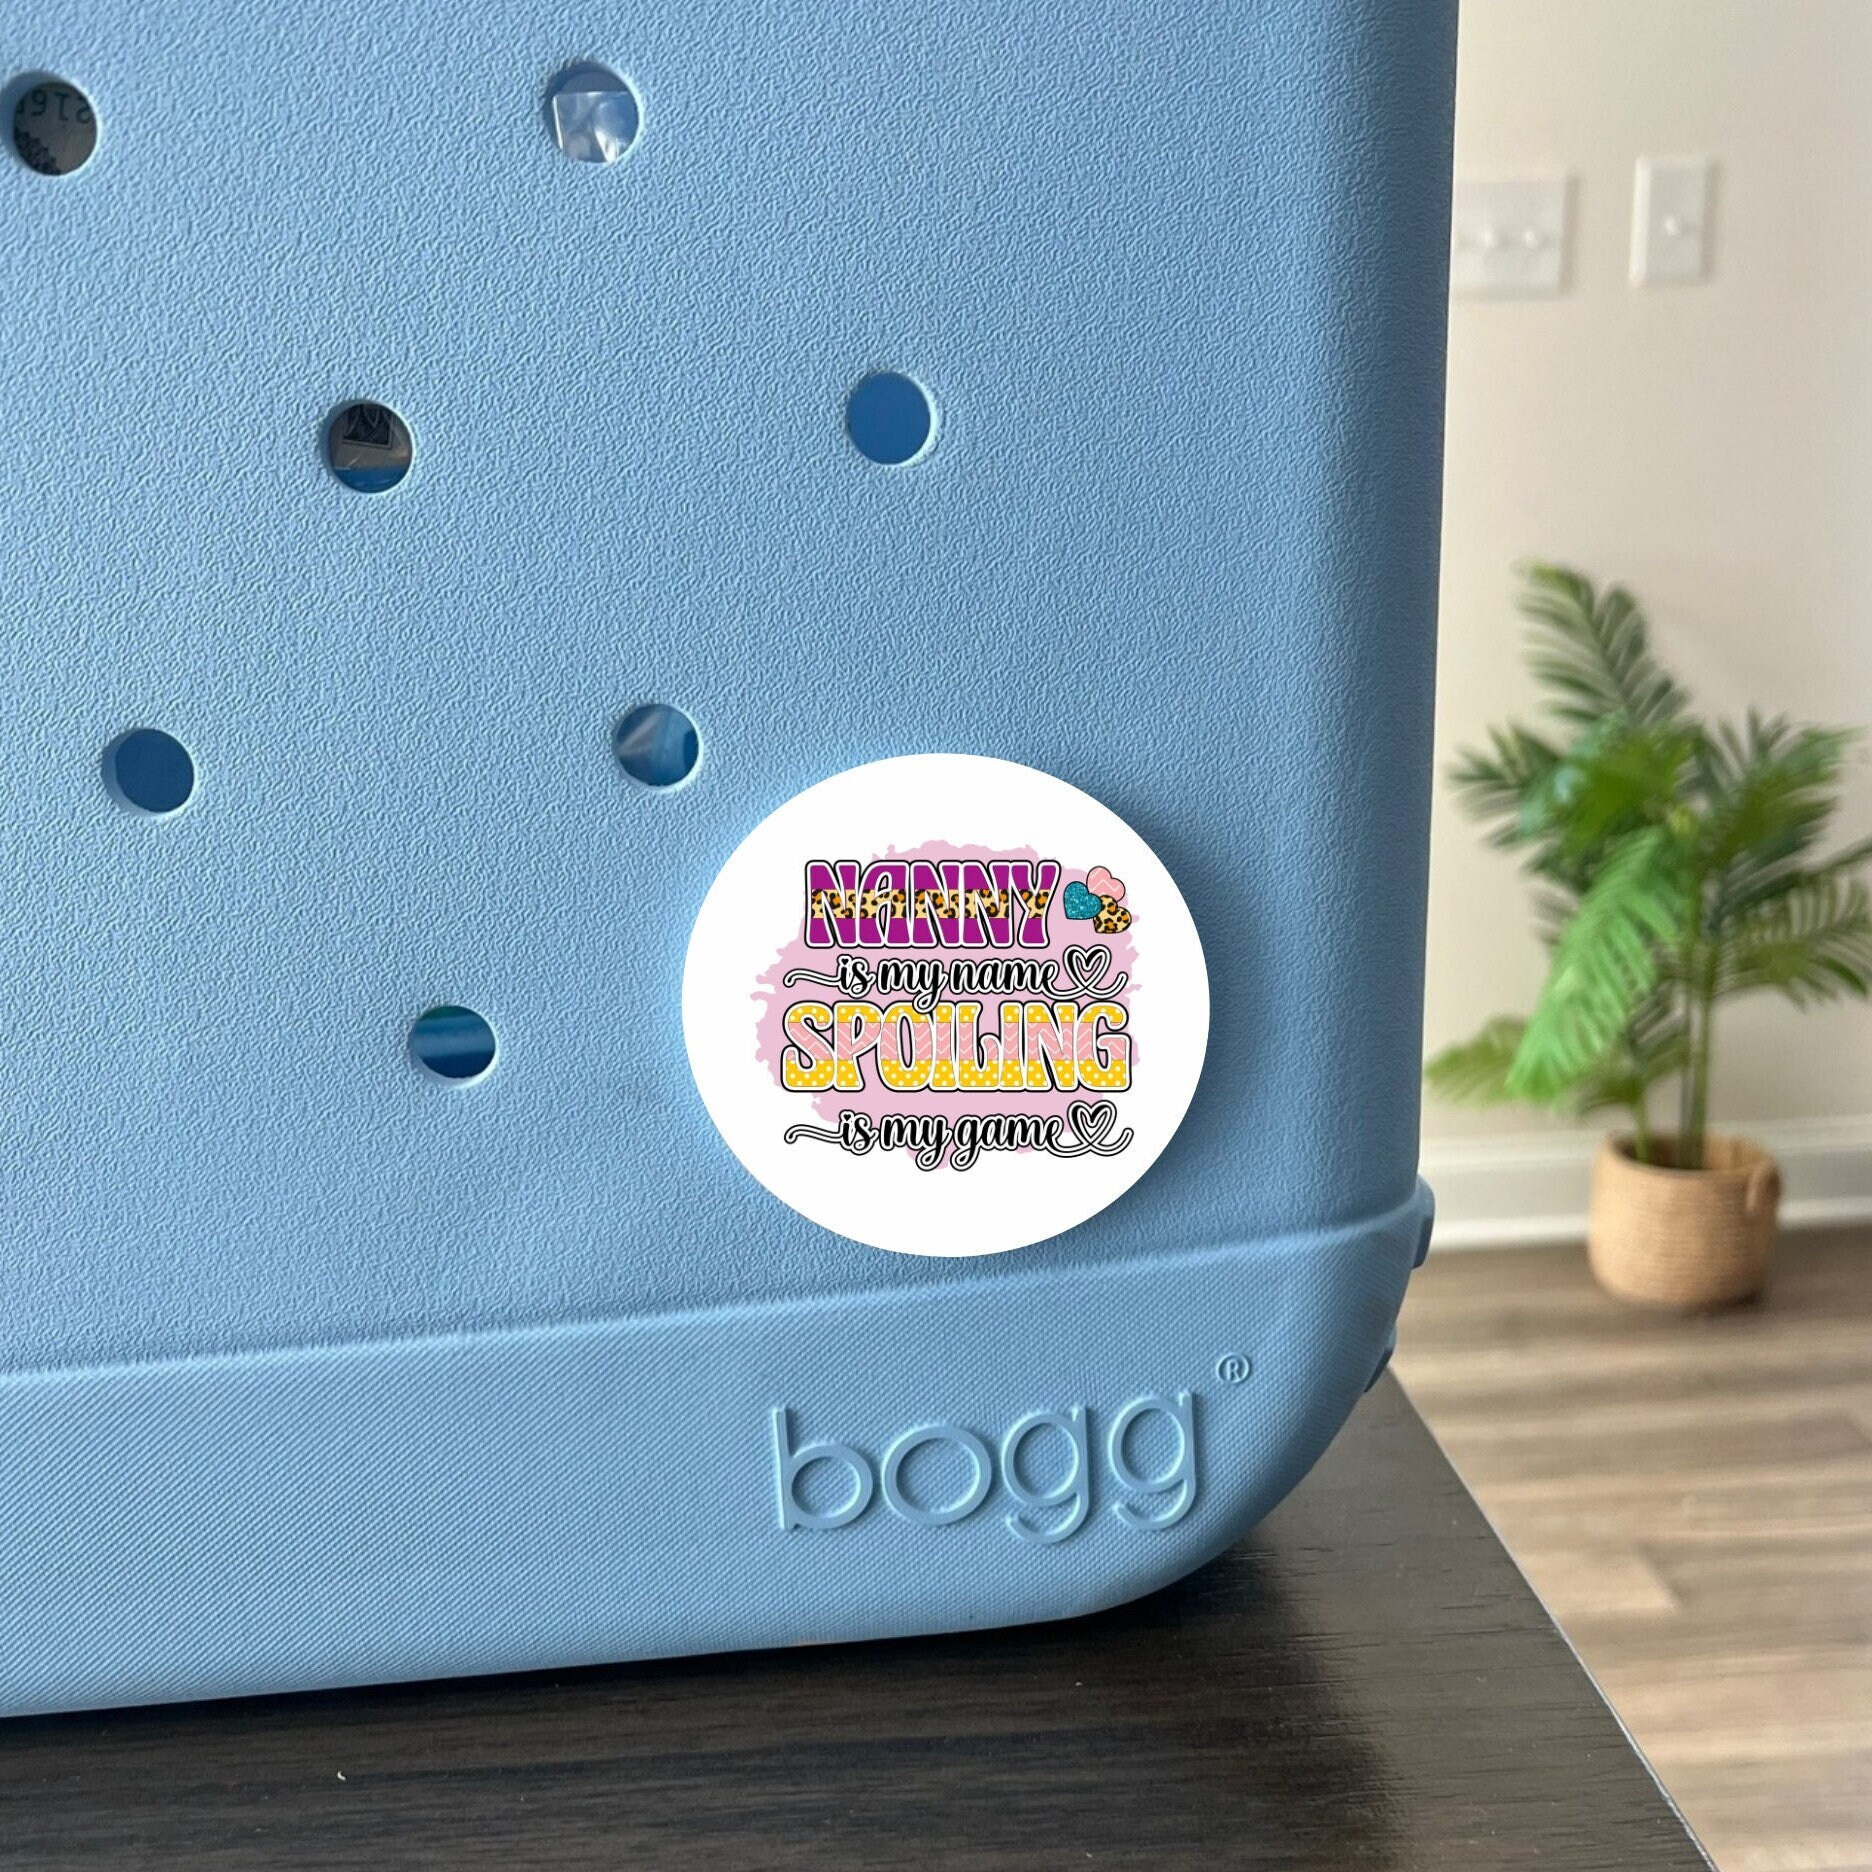 Bogg Bag Lookalikes - Where to Buy at the Best Prices